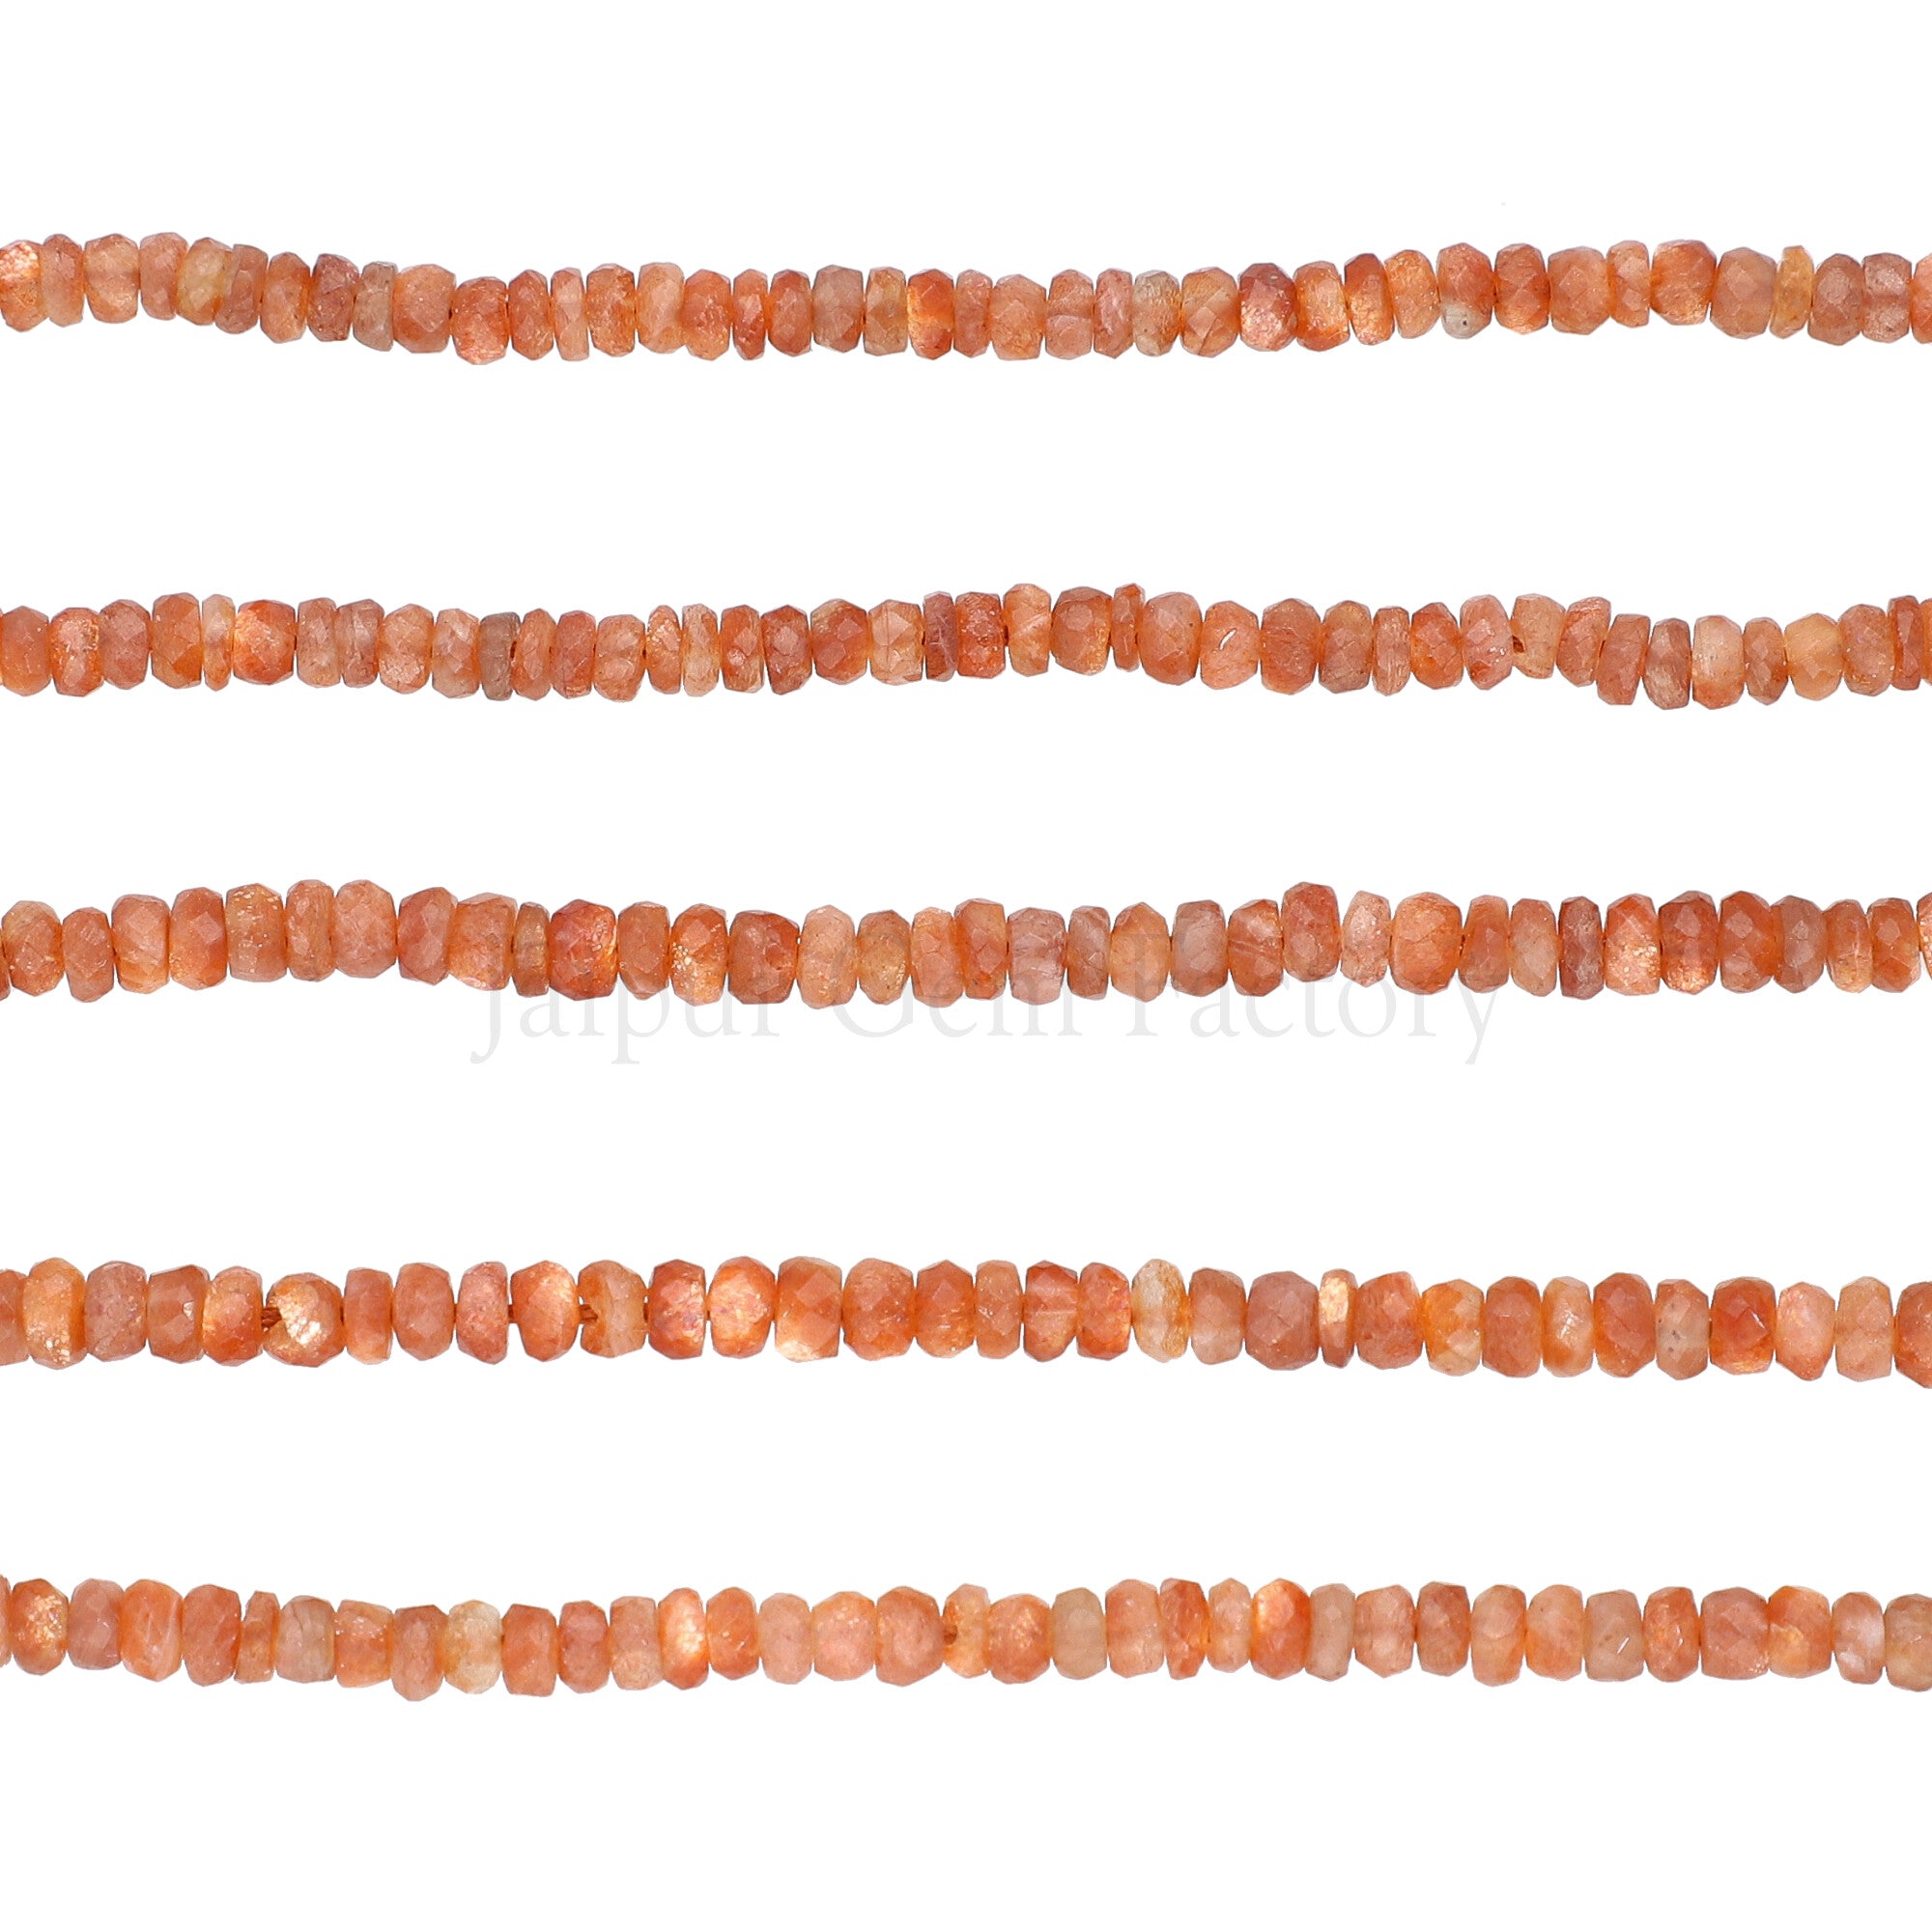 Sunstone 4 To 4.5 MM Faceted Rondelle Shape Beads Strand 1mm Drill